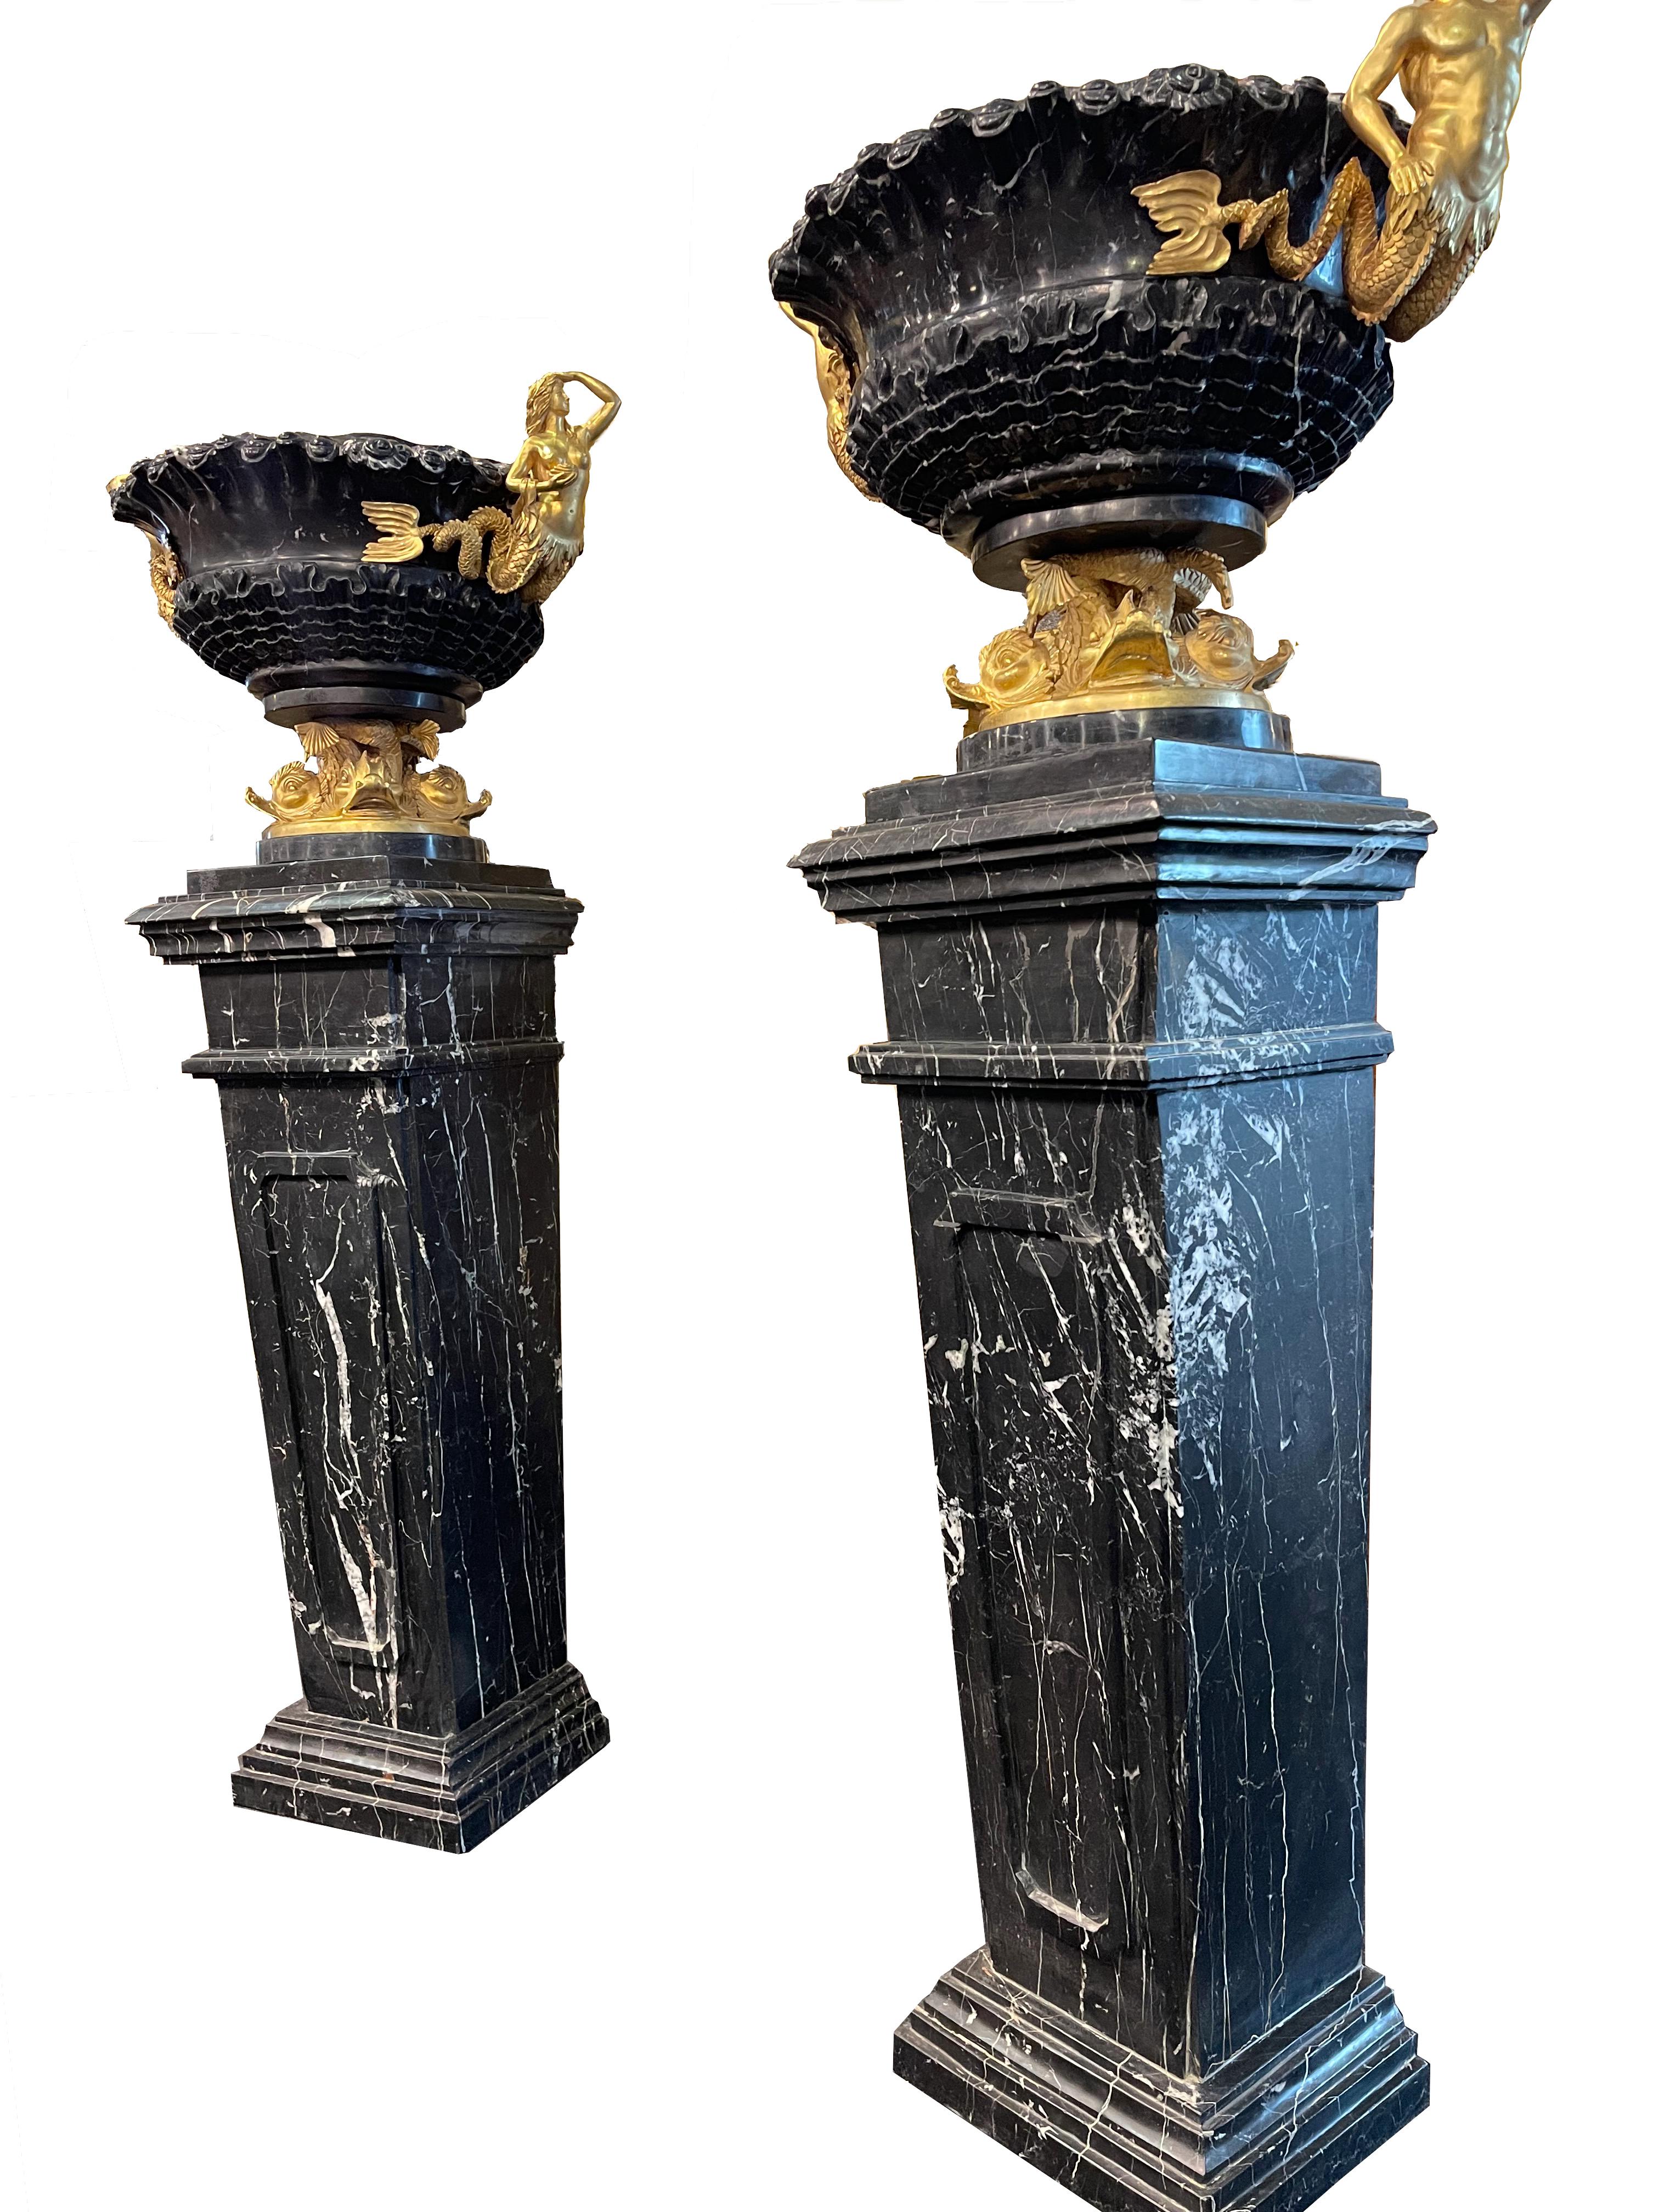 Majestic pair of vases with pedestals, in Grand Antique marble. Sculptural handles in finely chiseled and gilded bronze, bronze group depicting fish mastered in the base.
They come from an ancient residence in Palermo.
In the Manner of Pierre